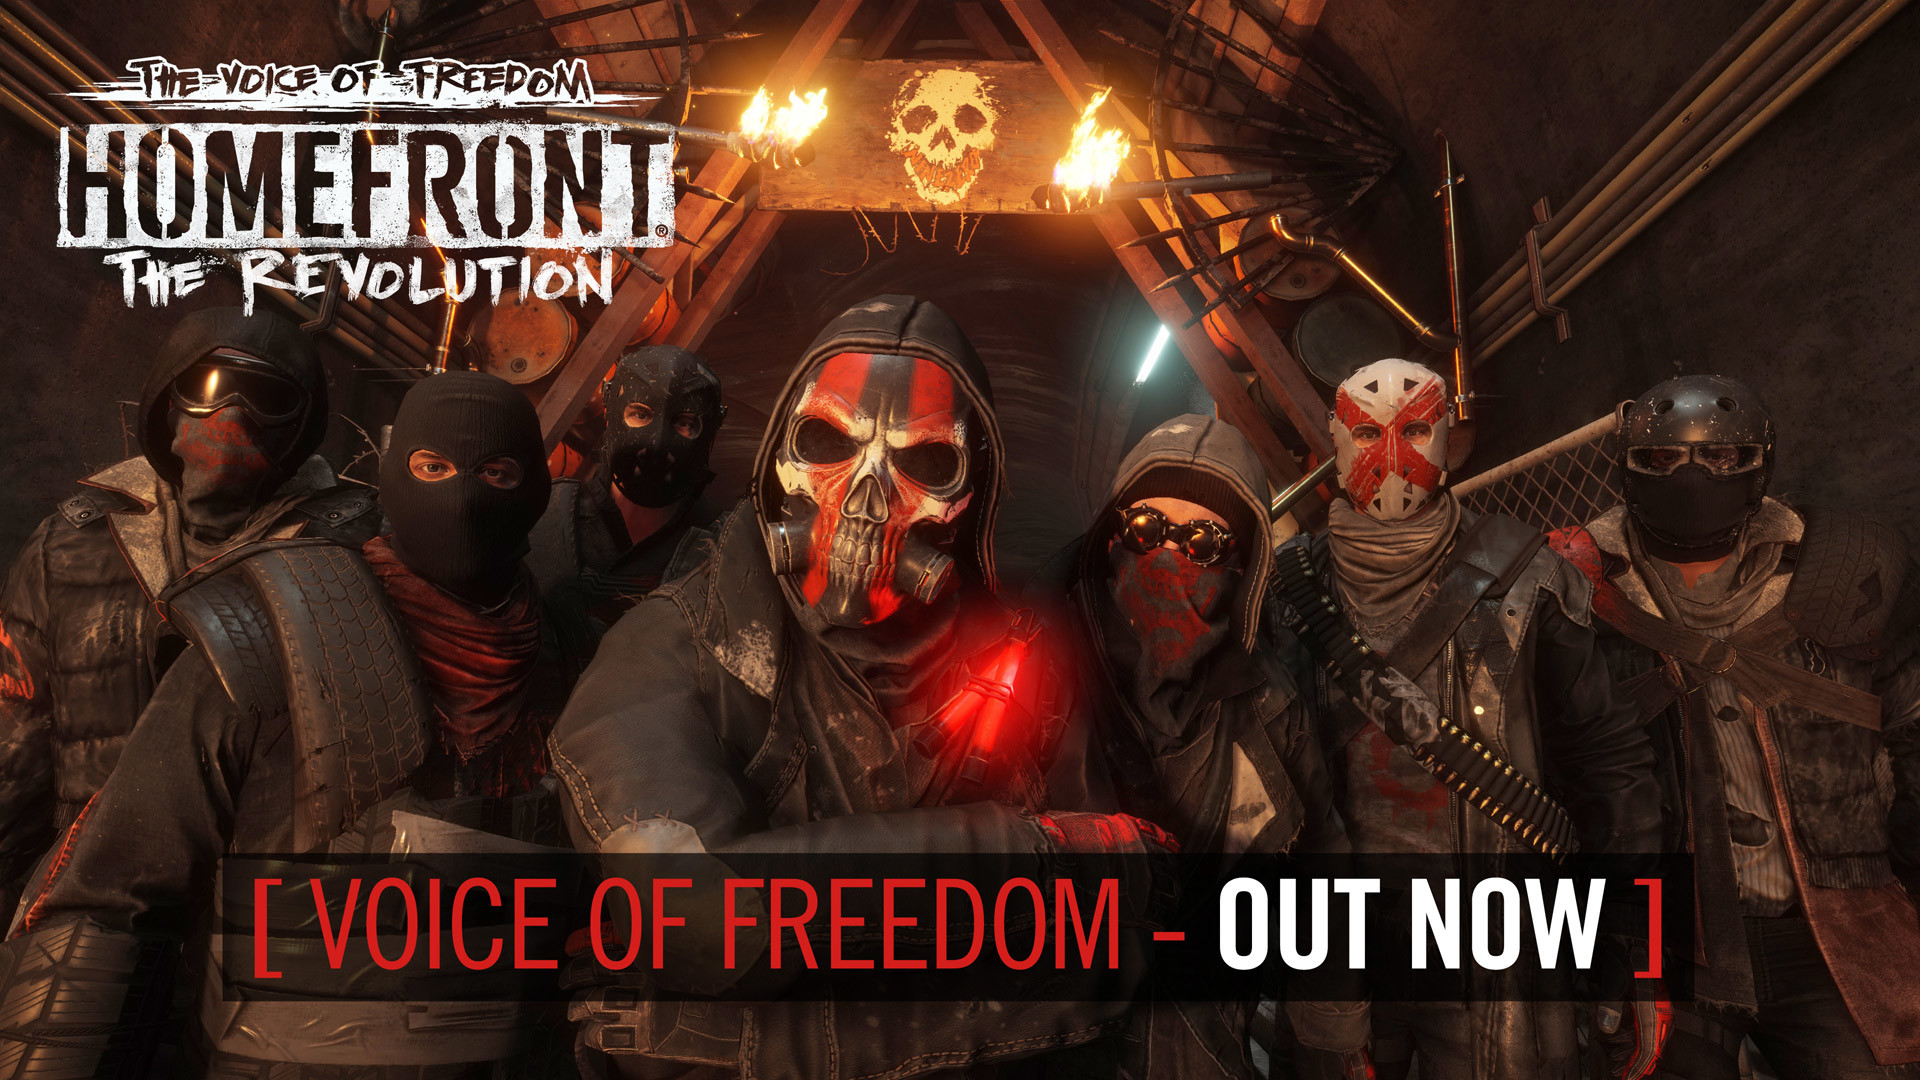 1920x1080 Free Homefront: The Revolution Wallpaper in 